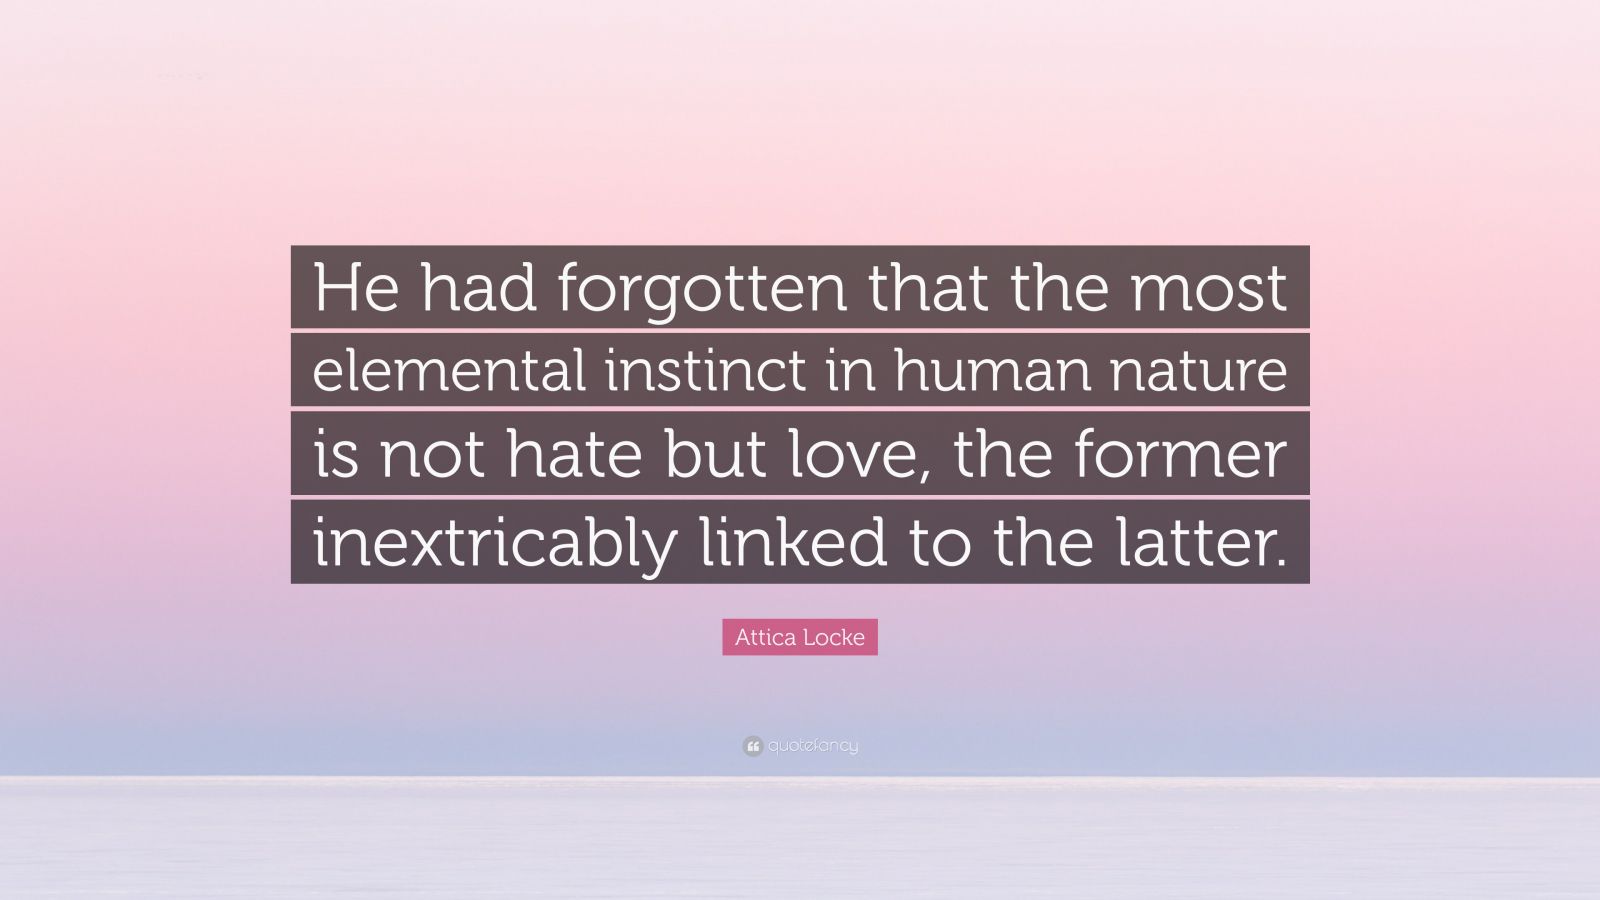 Attica Locke Quote: “He had forgotten that the most instinct in human nature is not hate but love, the former inextricably linked t...”